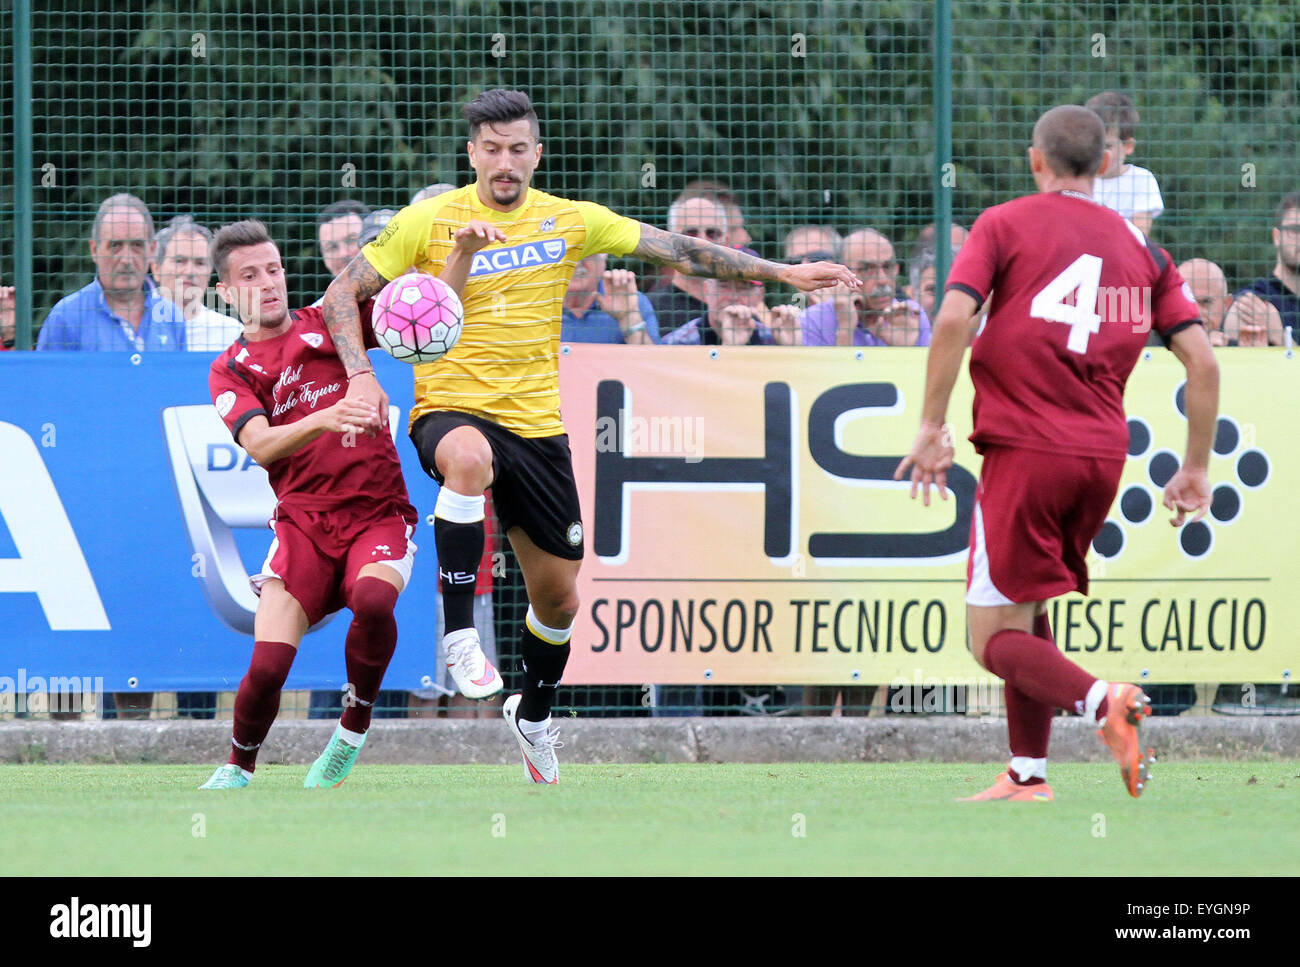 Udine, Italy. 29th July, 2015. Udinese's midfielder Panagiotis Giorgios Kone fights for the ball during the friendly pre-season football match Udinese Calcio v Clodiense on 29th July, 2015 at Bruseschi training center in Udine, Italy. Credit:  Andrea Spinelli/Alamy Live News Stock Photo